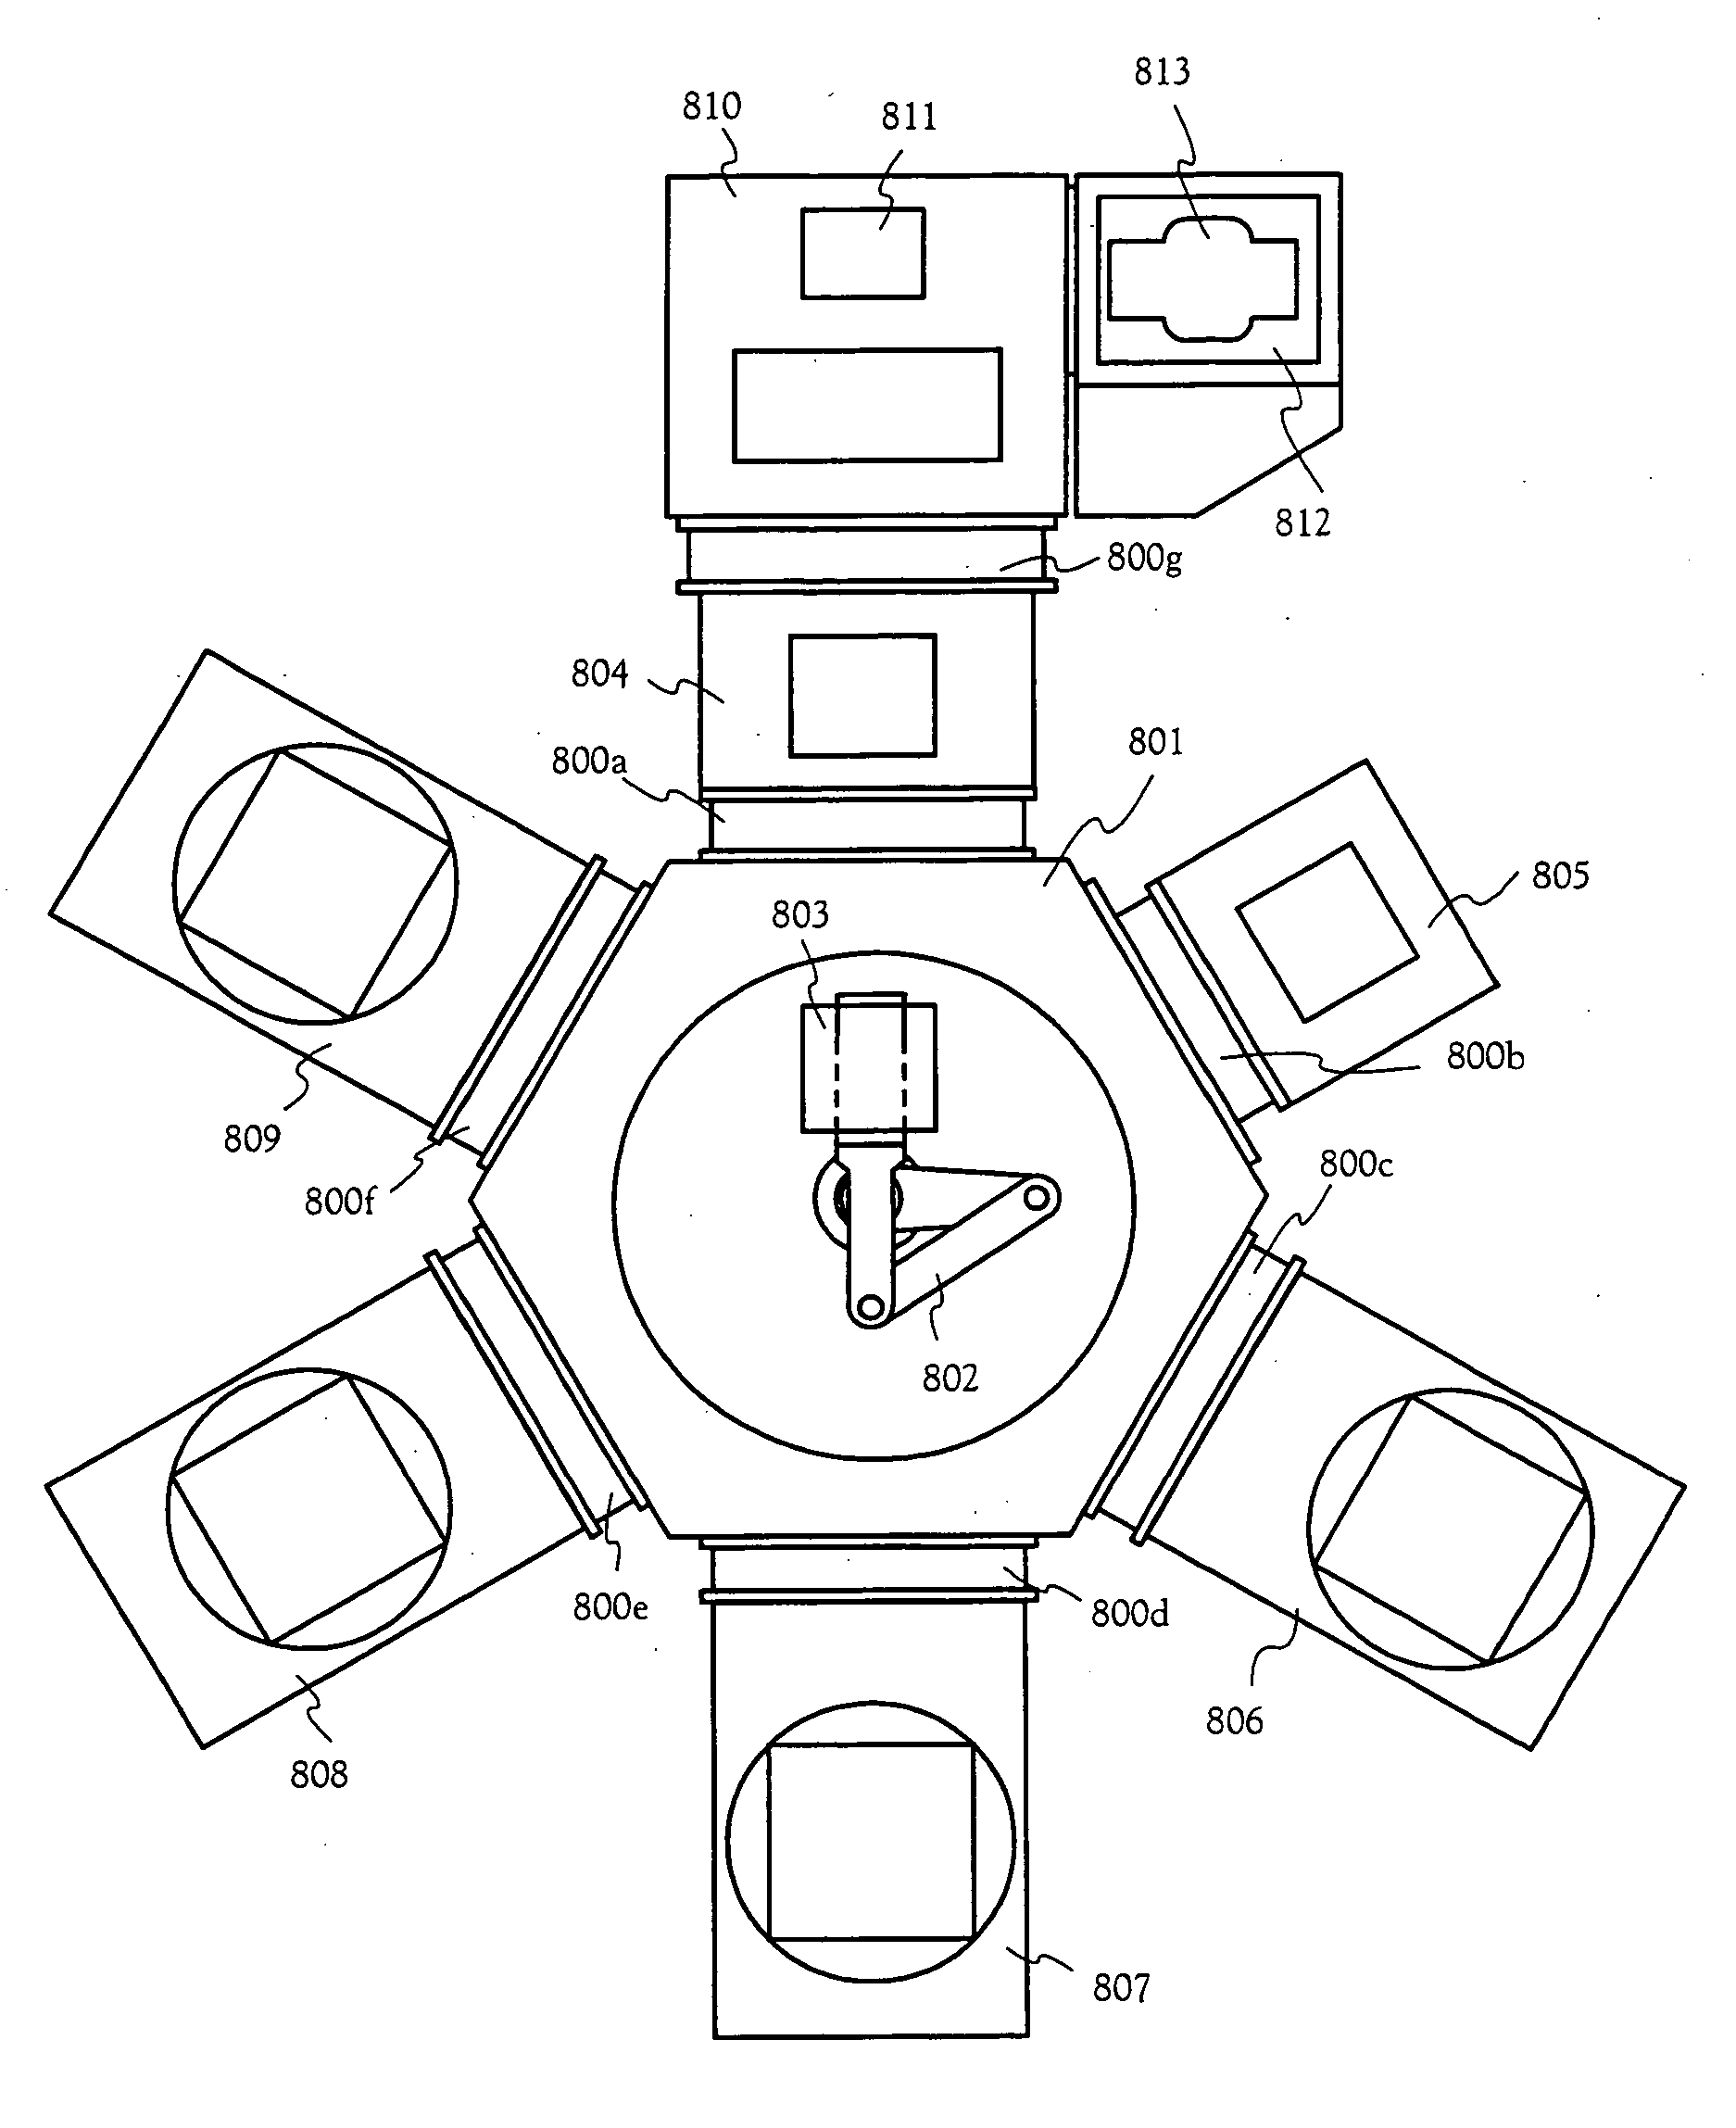 Film-forming apparatus, method of cleaning the same and method of manufacturing a light-emitting device